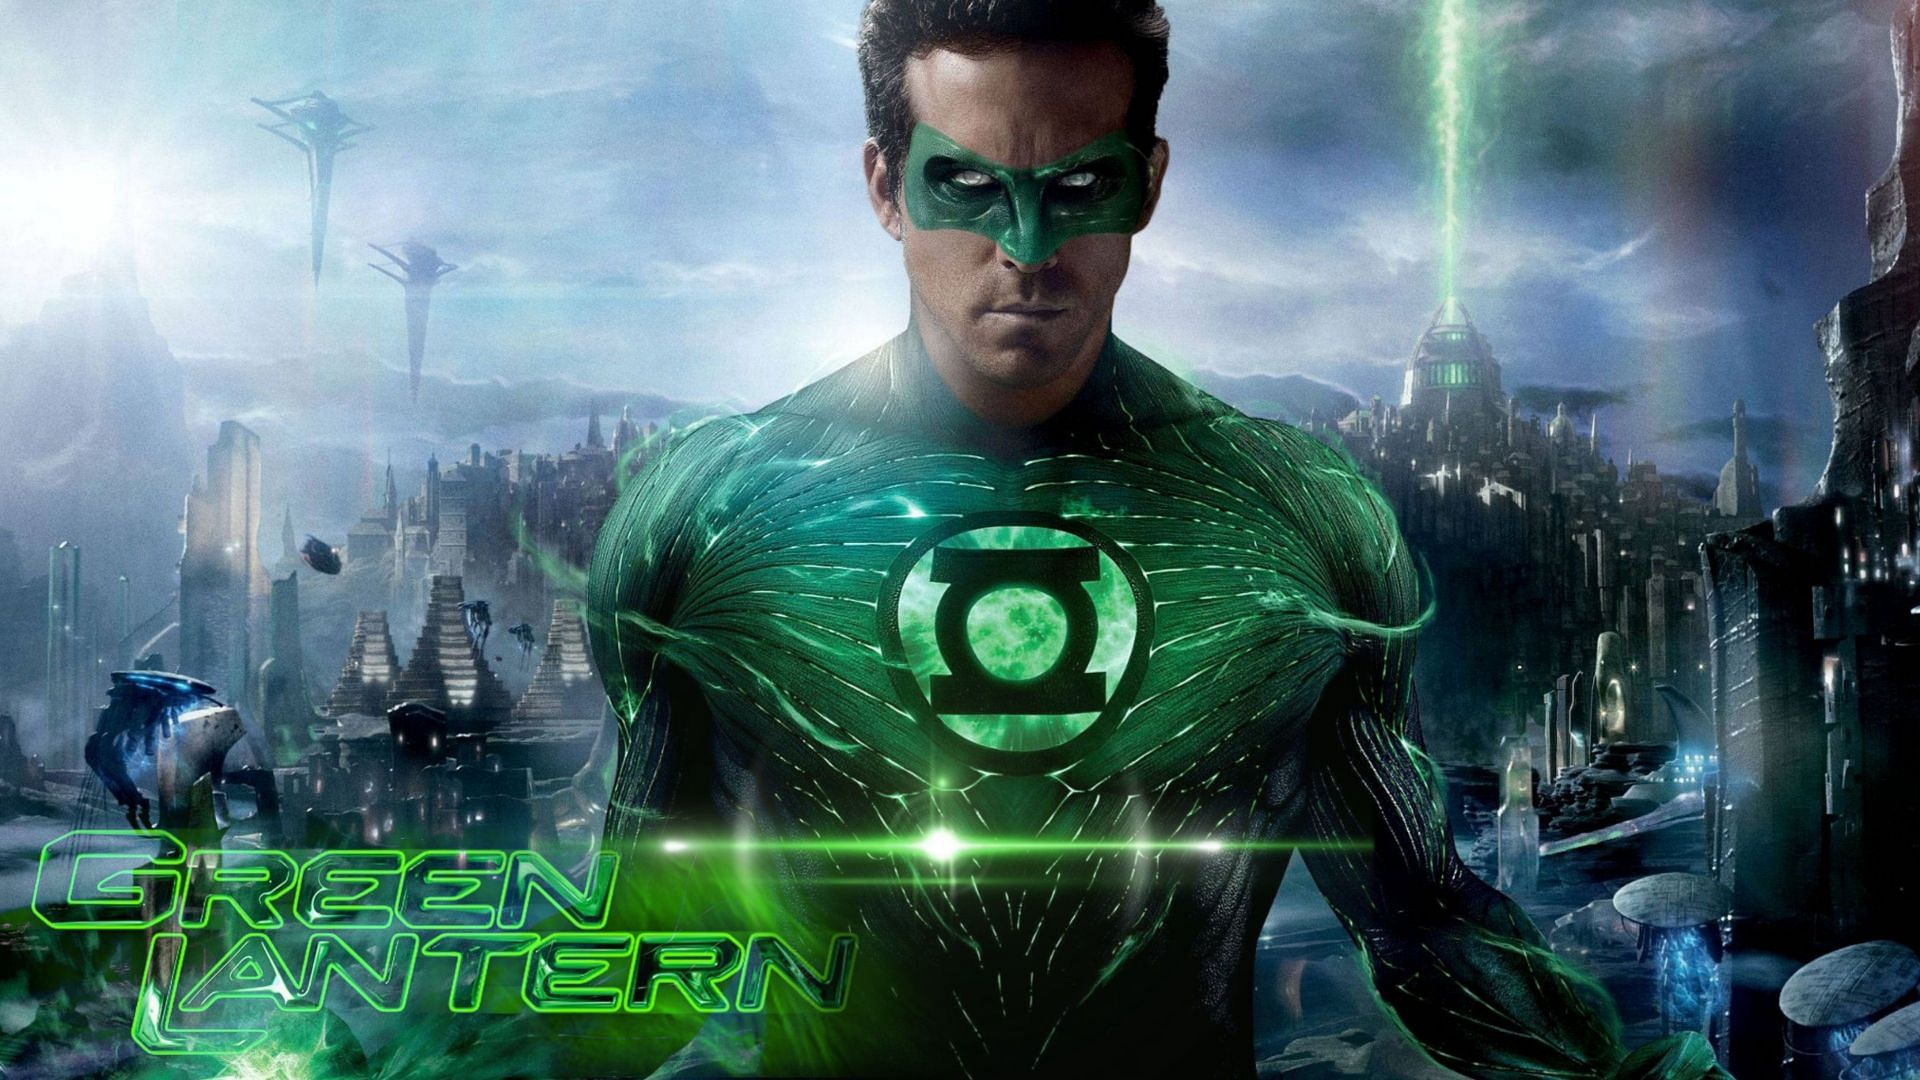 The Green Lantern is one of the clearest examples of what true power looks like. (Image Via Sportskeeda)